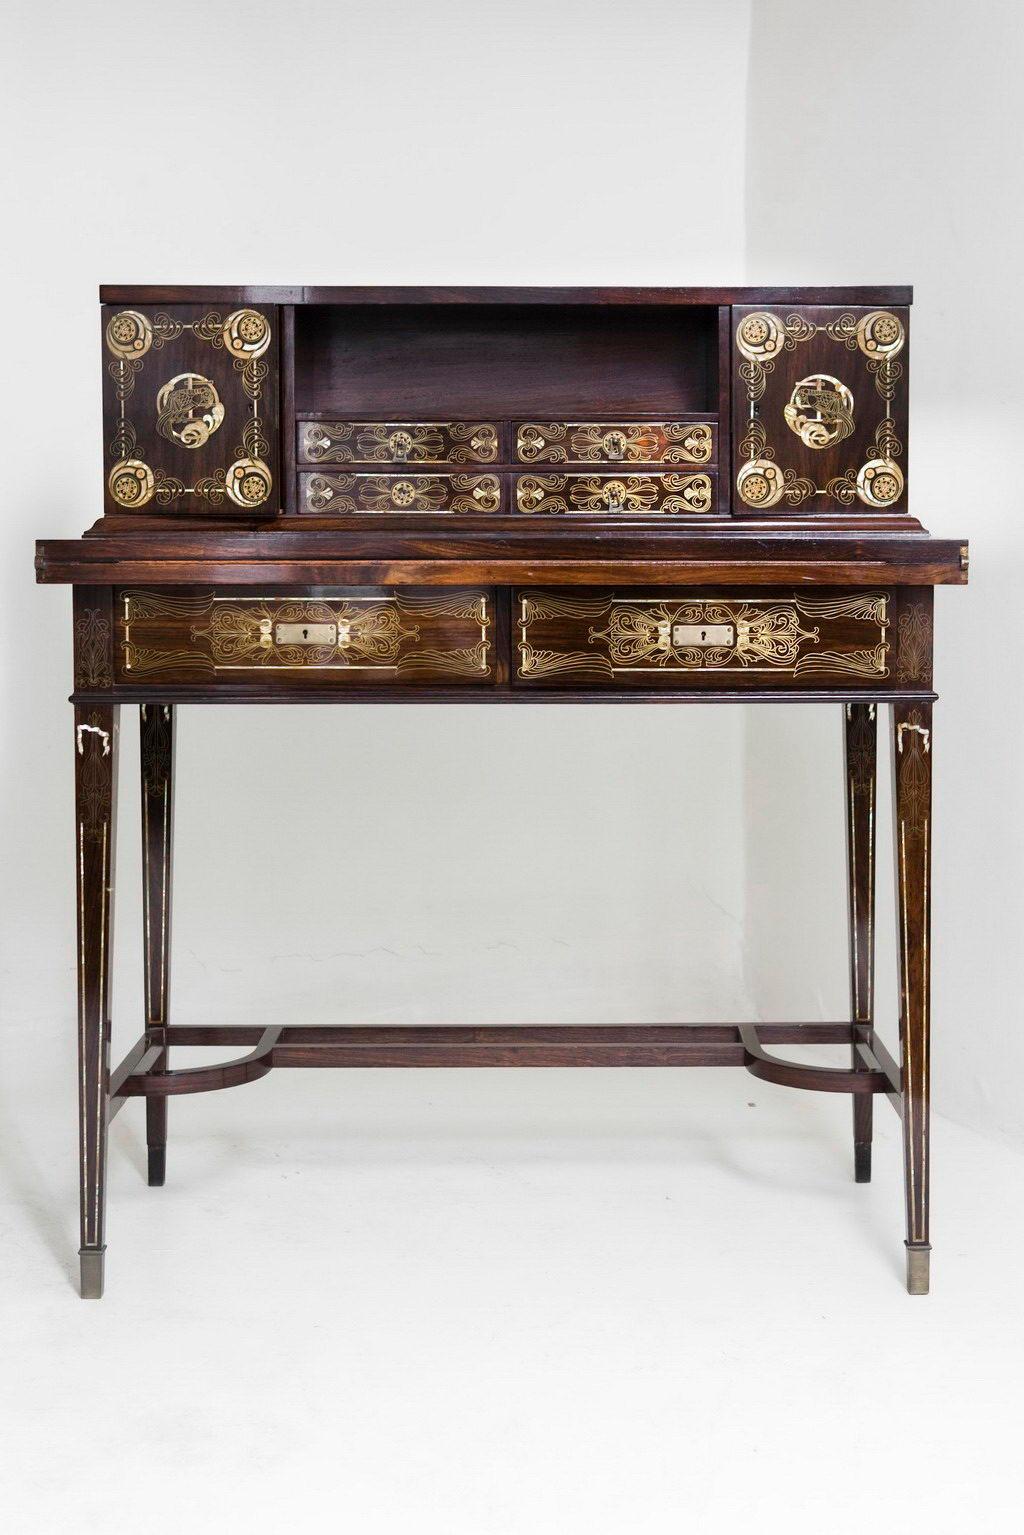 Eugenio Quarti (Desk , chair and Trash ) 
Style: Liberty or Art Nouveau or Modernism or Jugendstil
Furniture realized mainly in inlays of nacre and metallic applications, parchament
bronze ferrules.
We have specialized in the sale of Art Deco and